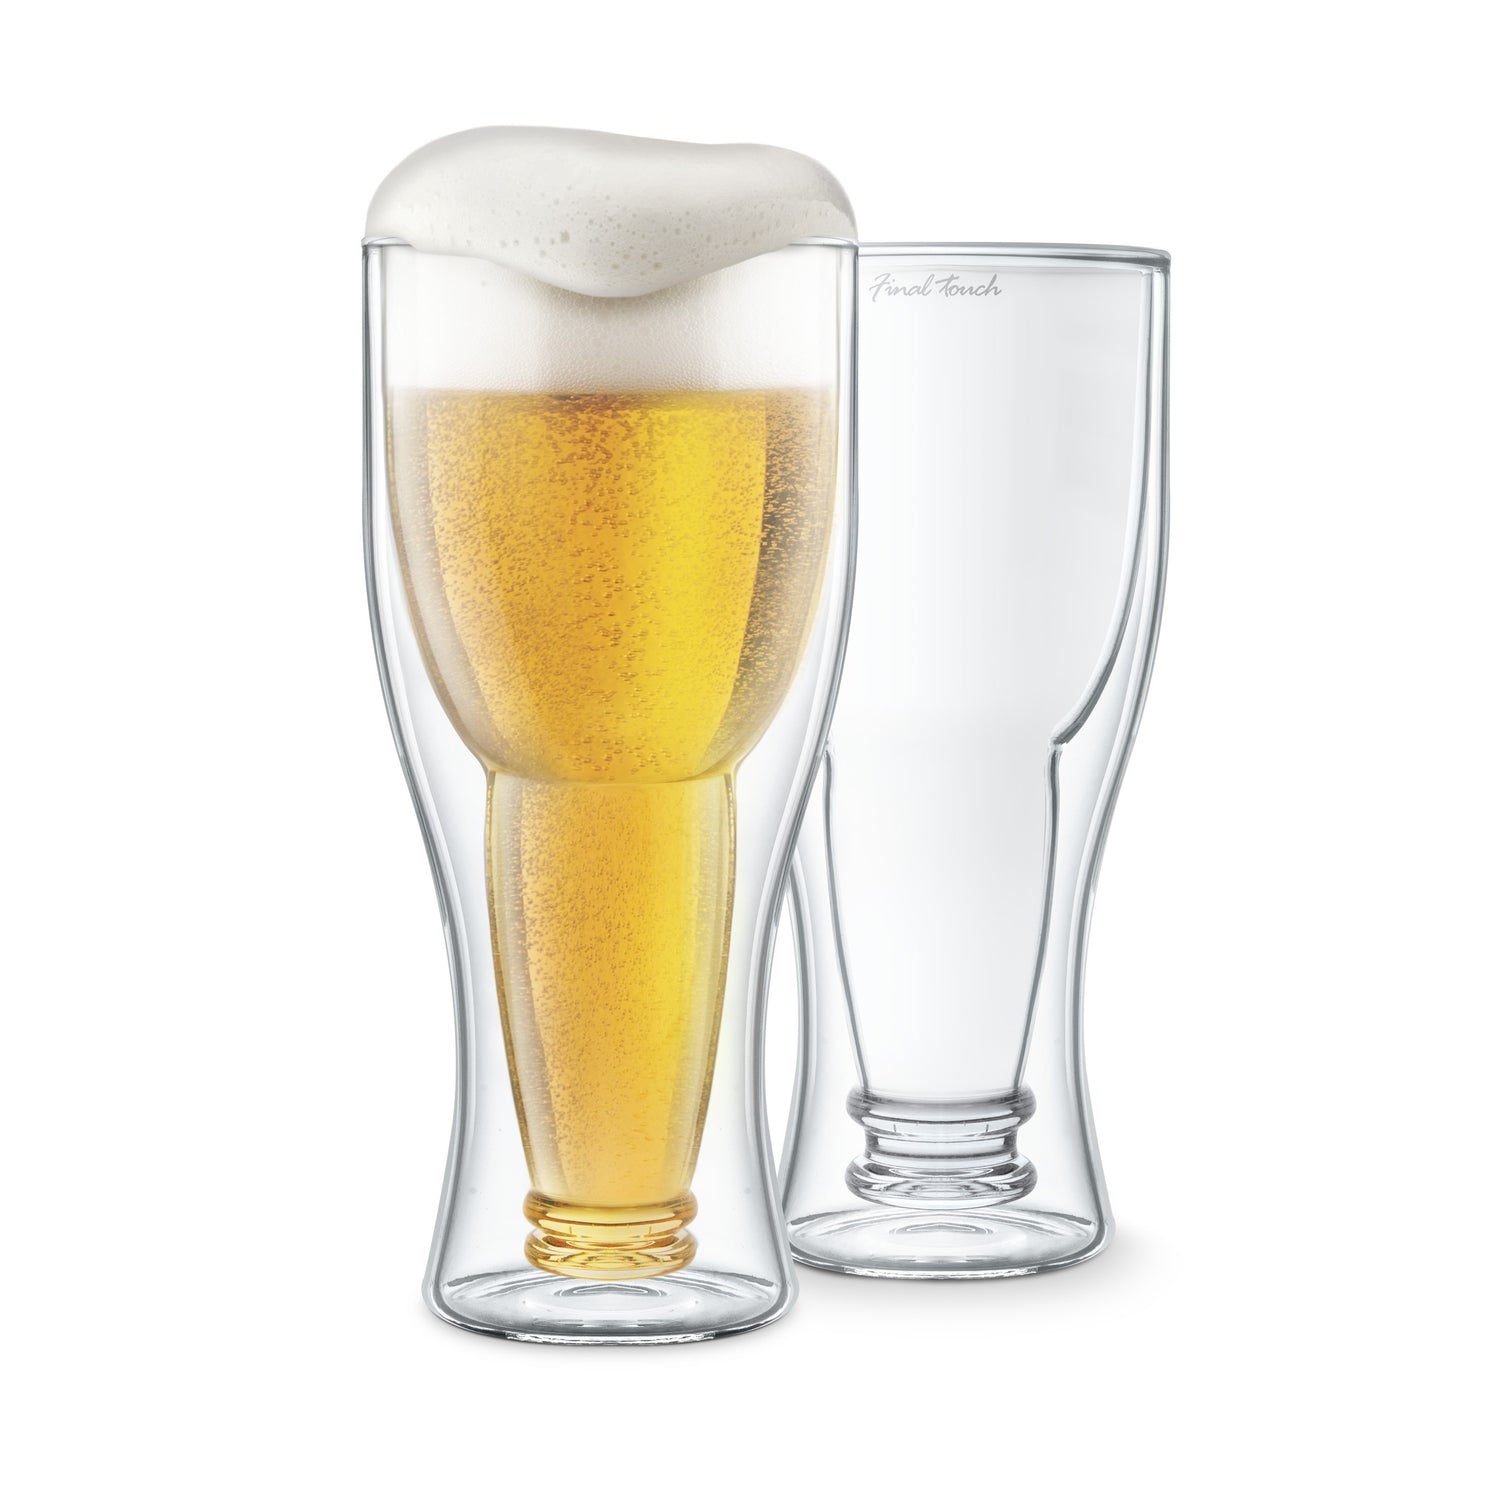 Bottoms Up Beer Glass - Set of 2